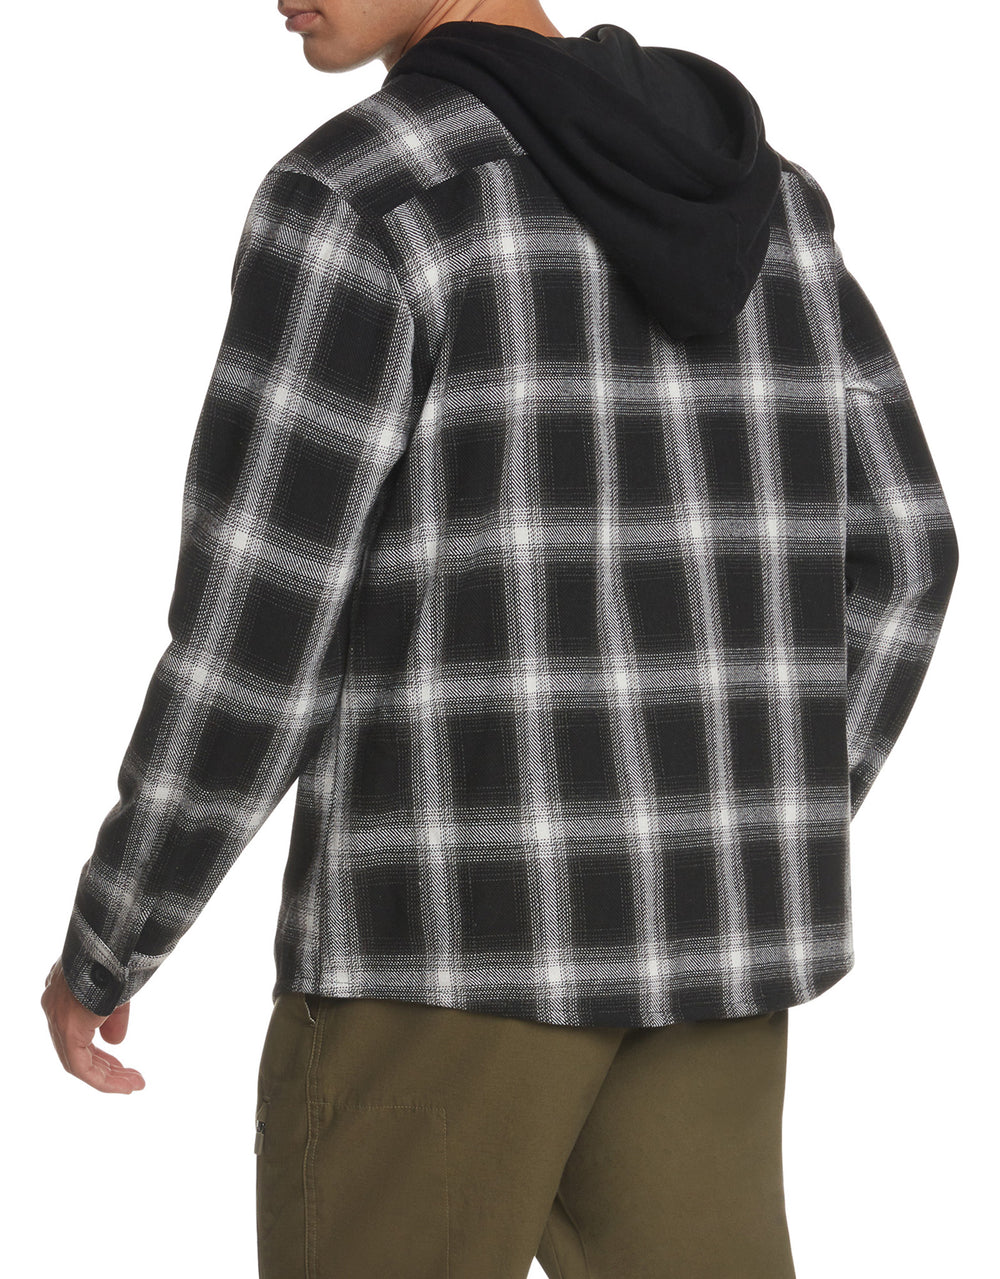 LUCLESAM Mens Plaid Splicing Hoodie Classic Flannel Streetwear Plus Size  Sweatshirts With Long Sleeves And Hooded Design Suitar Hombre 230809 From  Luo02, $20.09